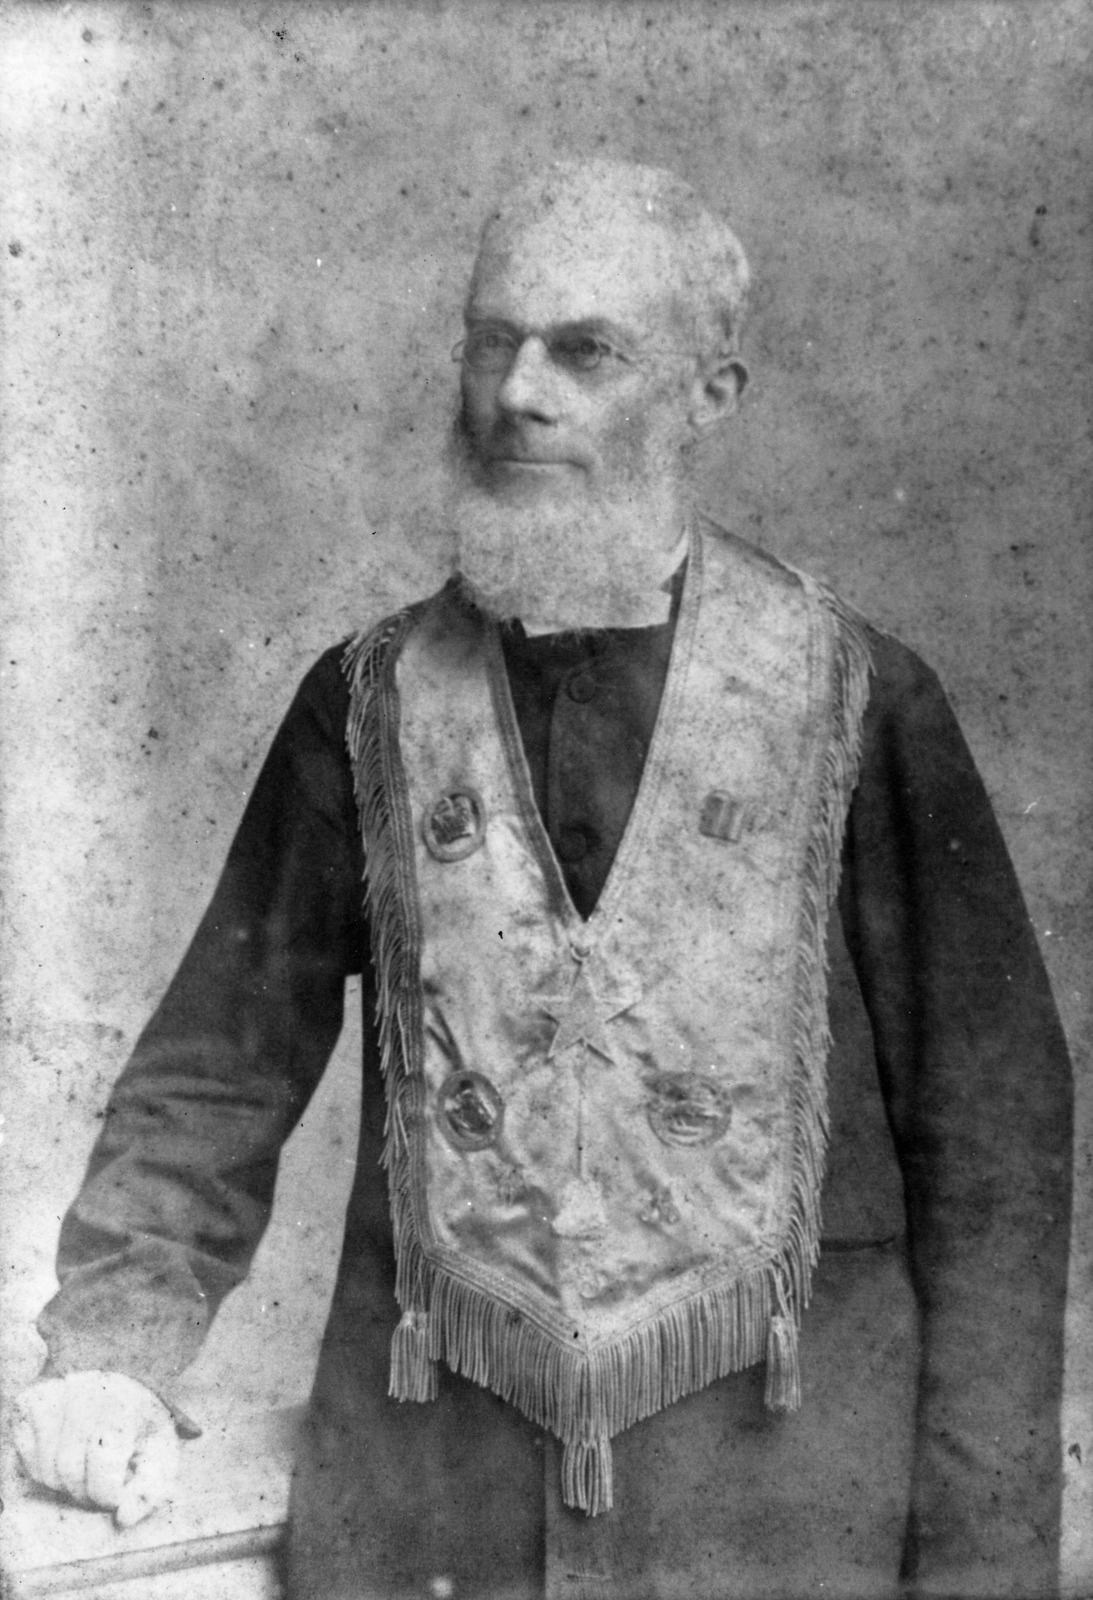 Reverend Edward Griffith in Oddfellows robes. Source: John Oxley Library, State Library of Queensland, Negative No. 76288.